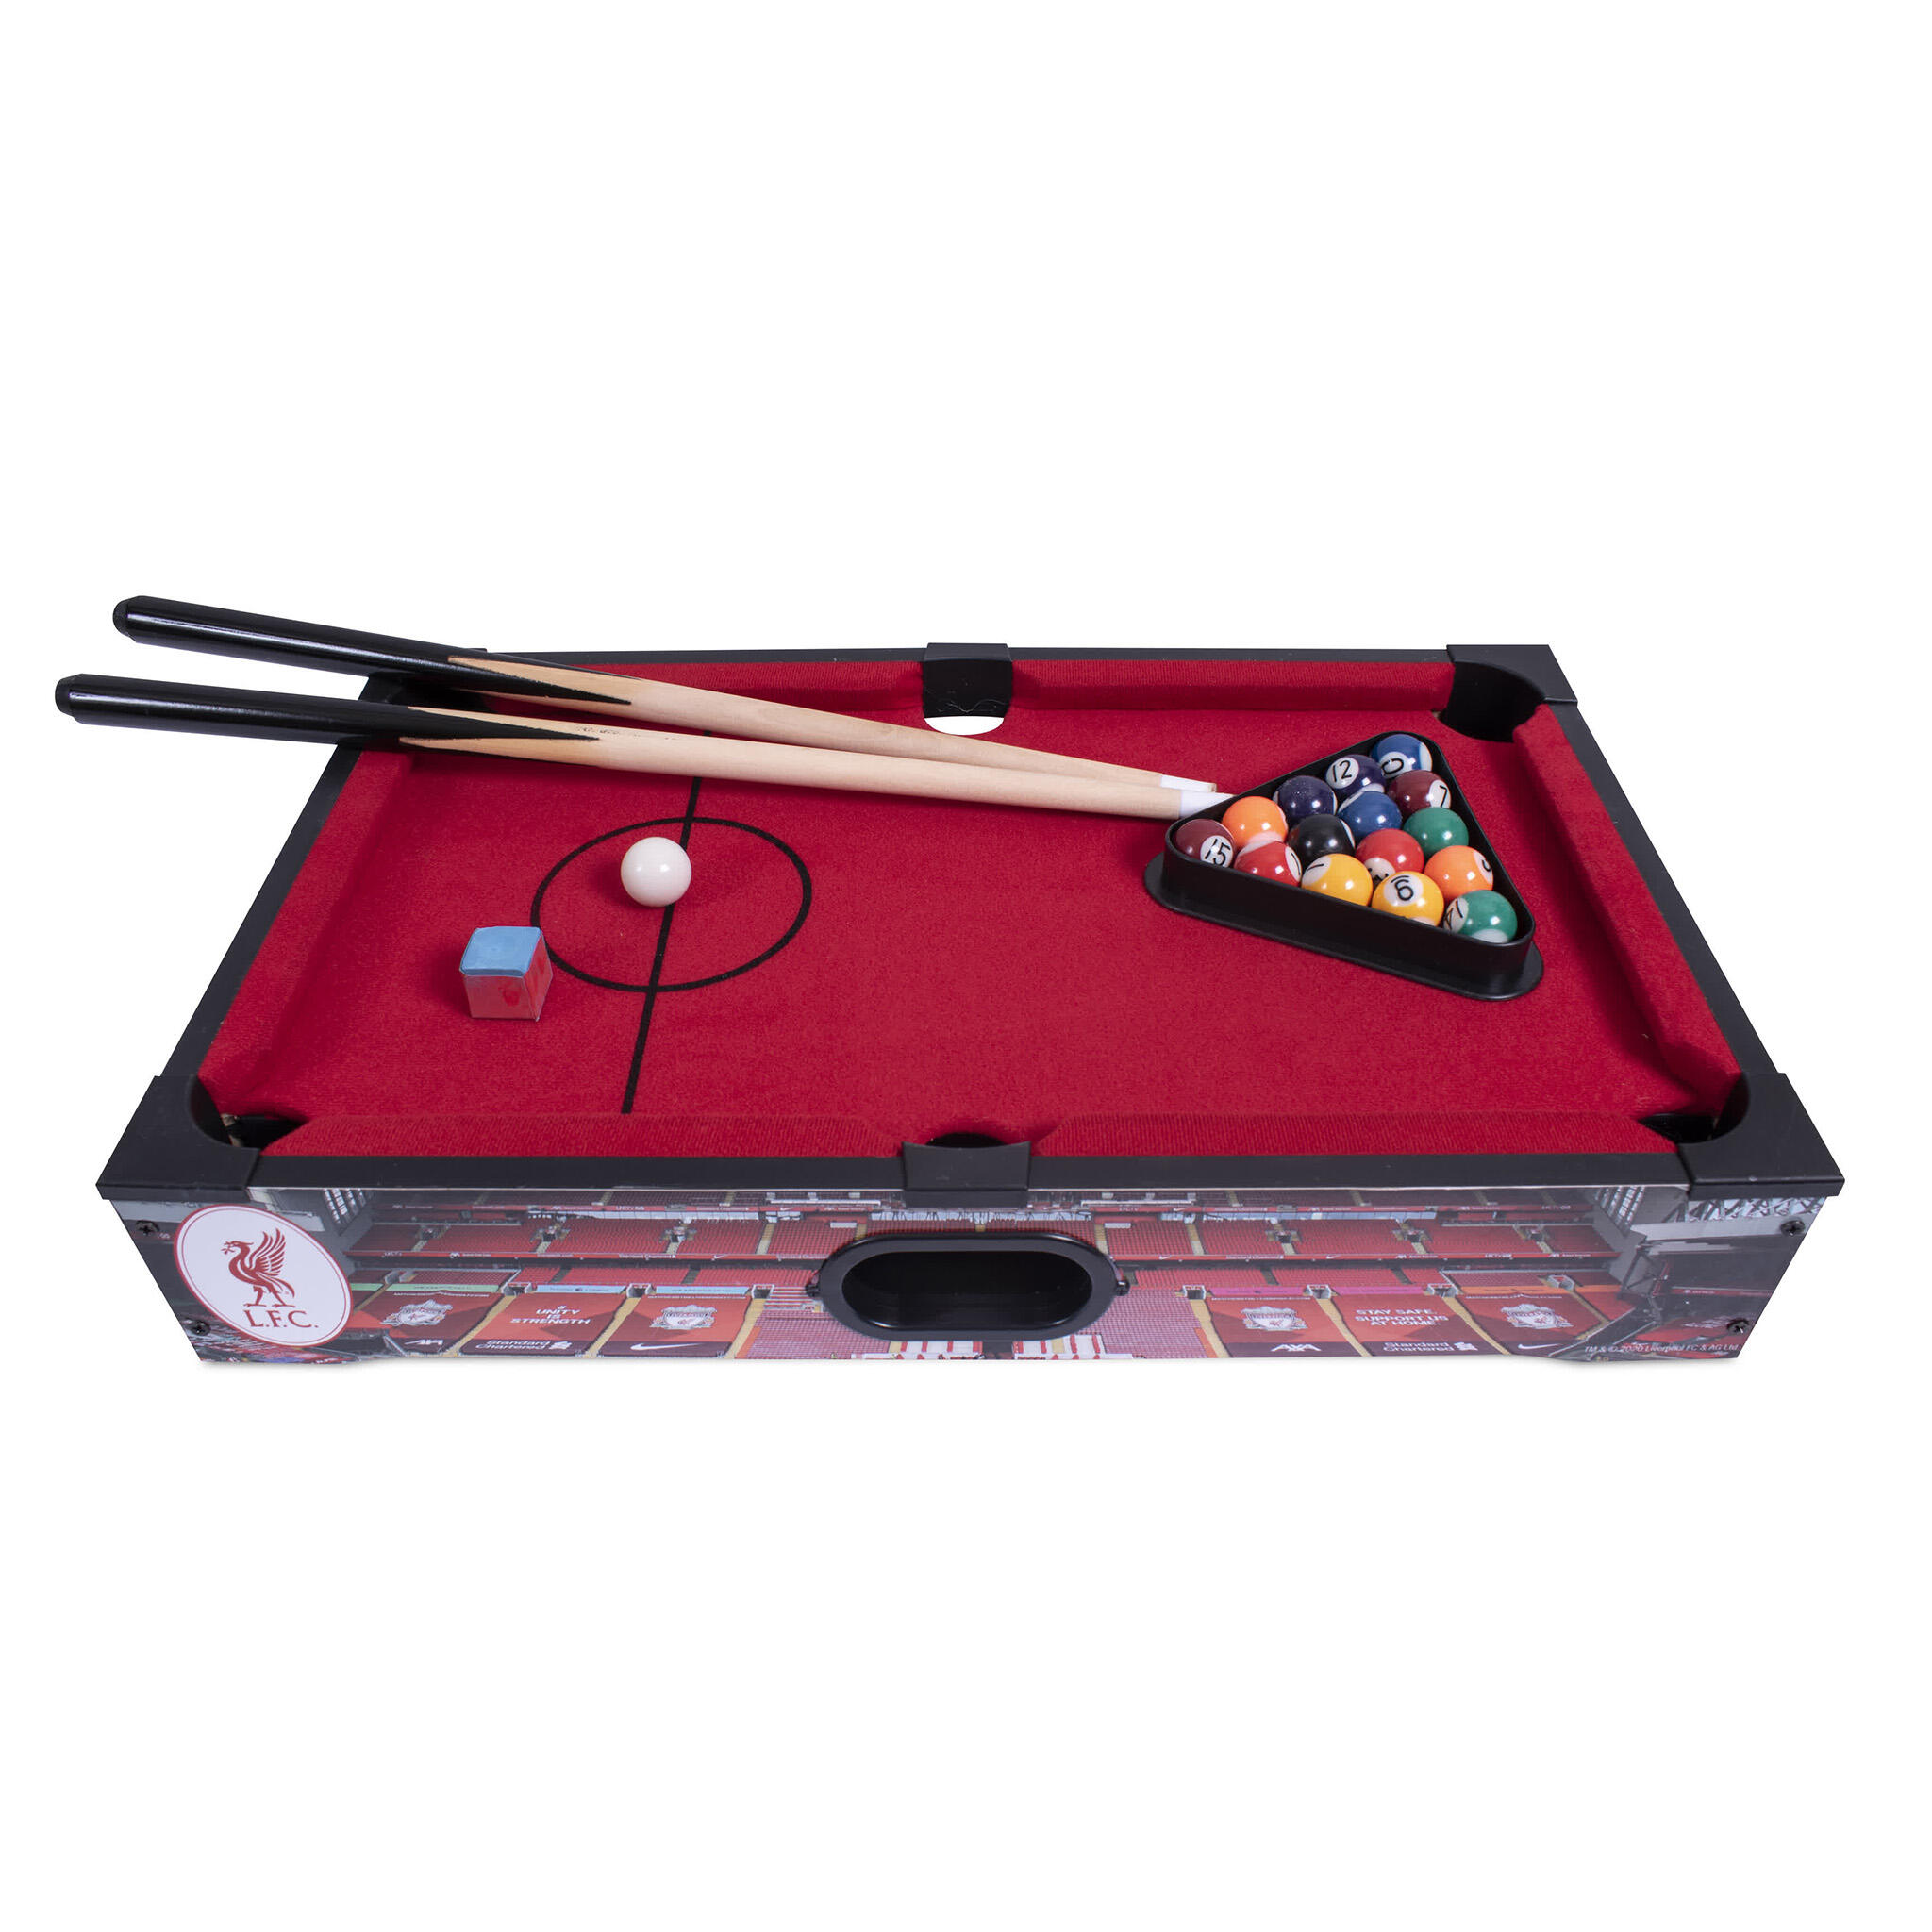 Liverpool 20 inch Pool Table 2/3